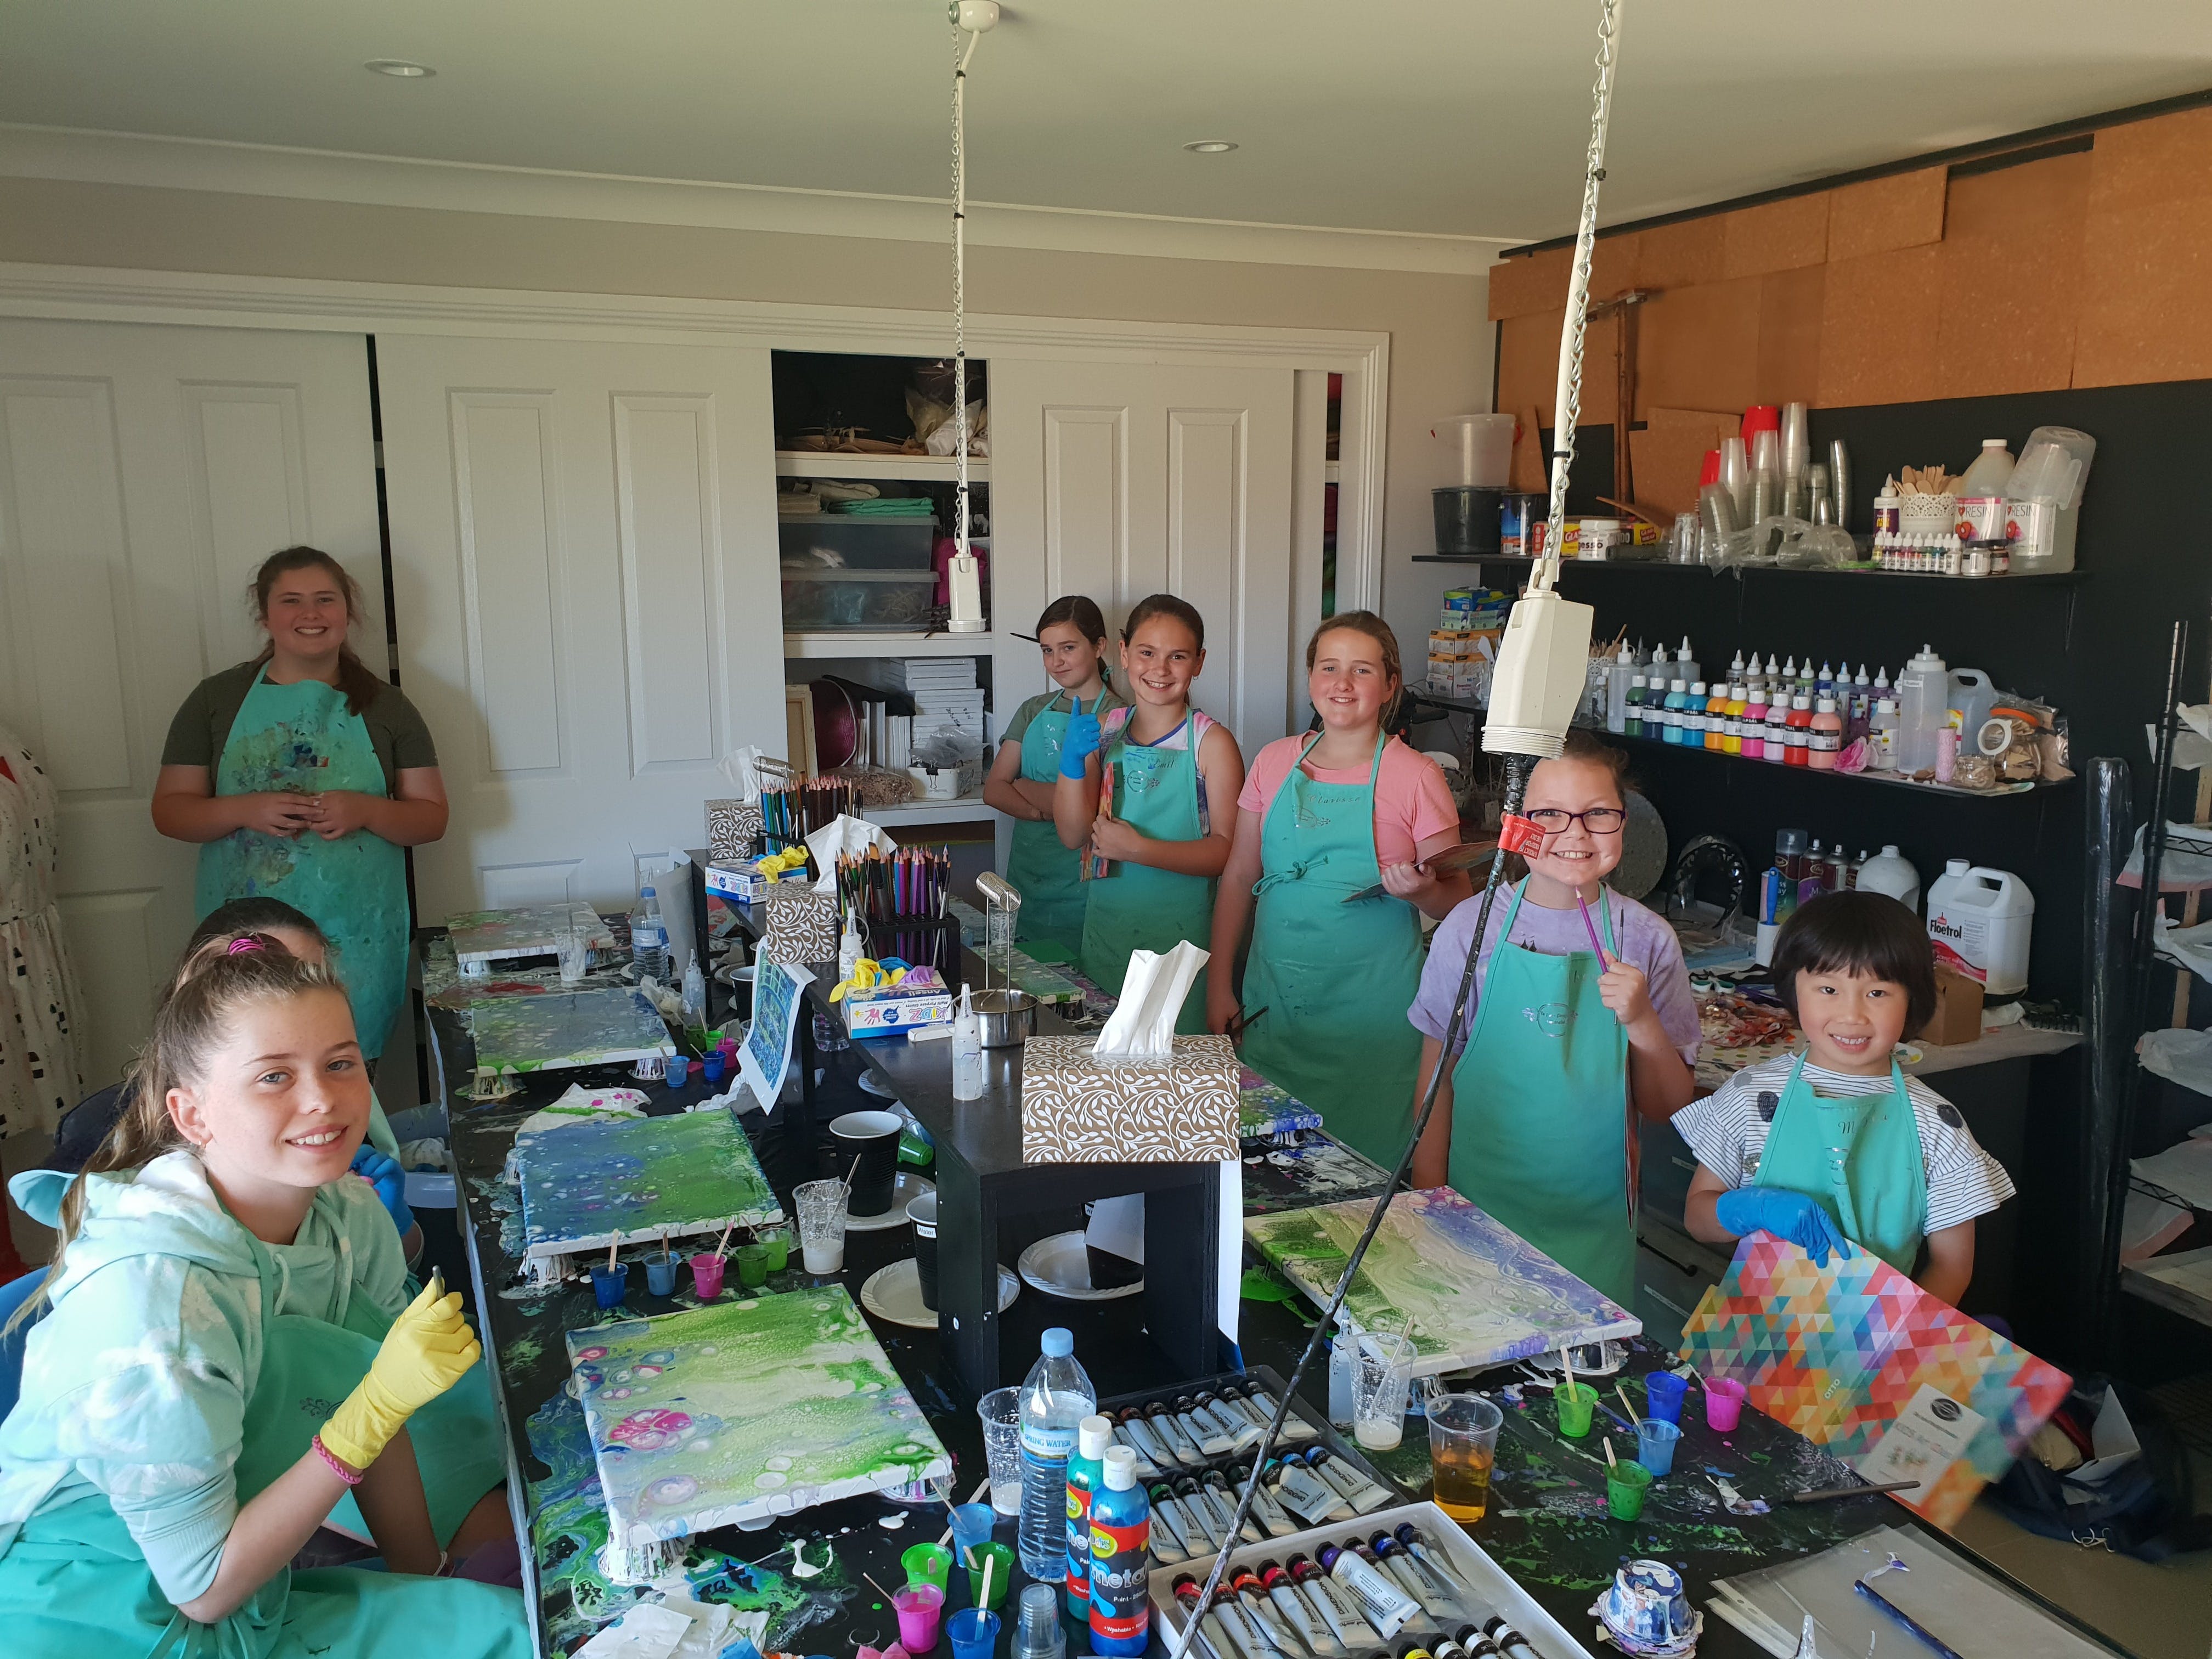 School holidays - Kids art class - Painting - Pubs and Clubs